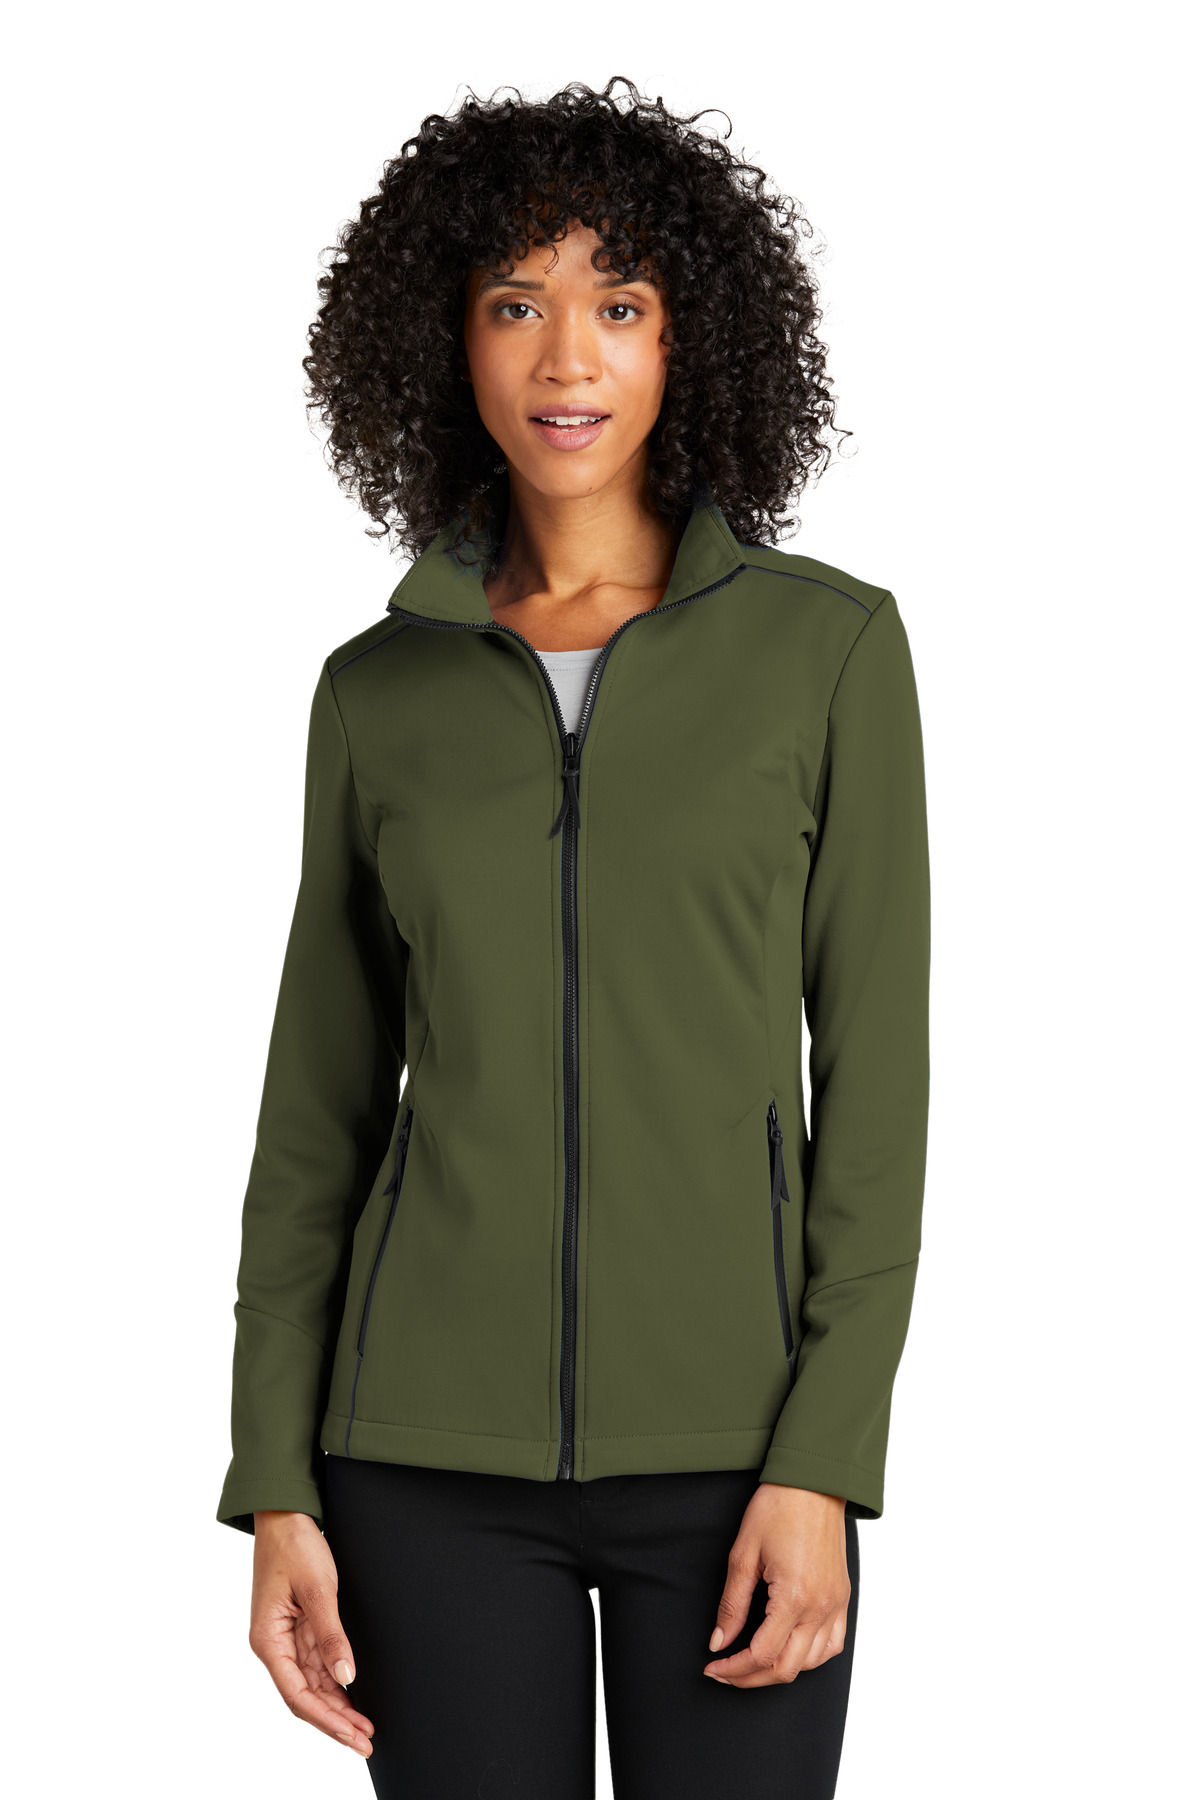 Port Authority Ladies Collective Tech Soft Shell Jacket-Port Authority